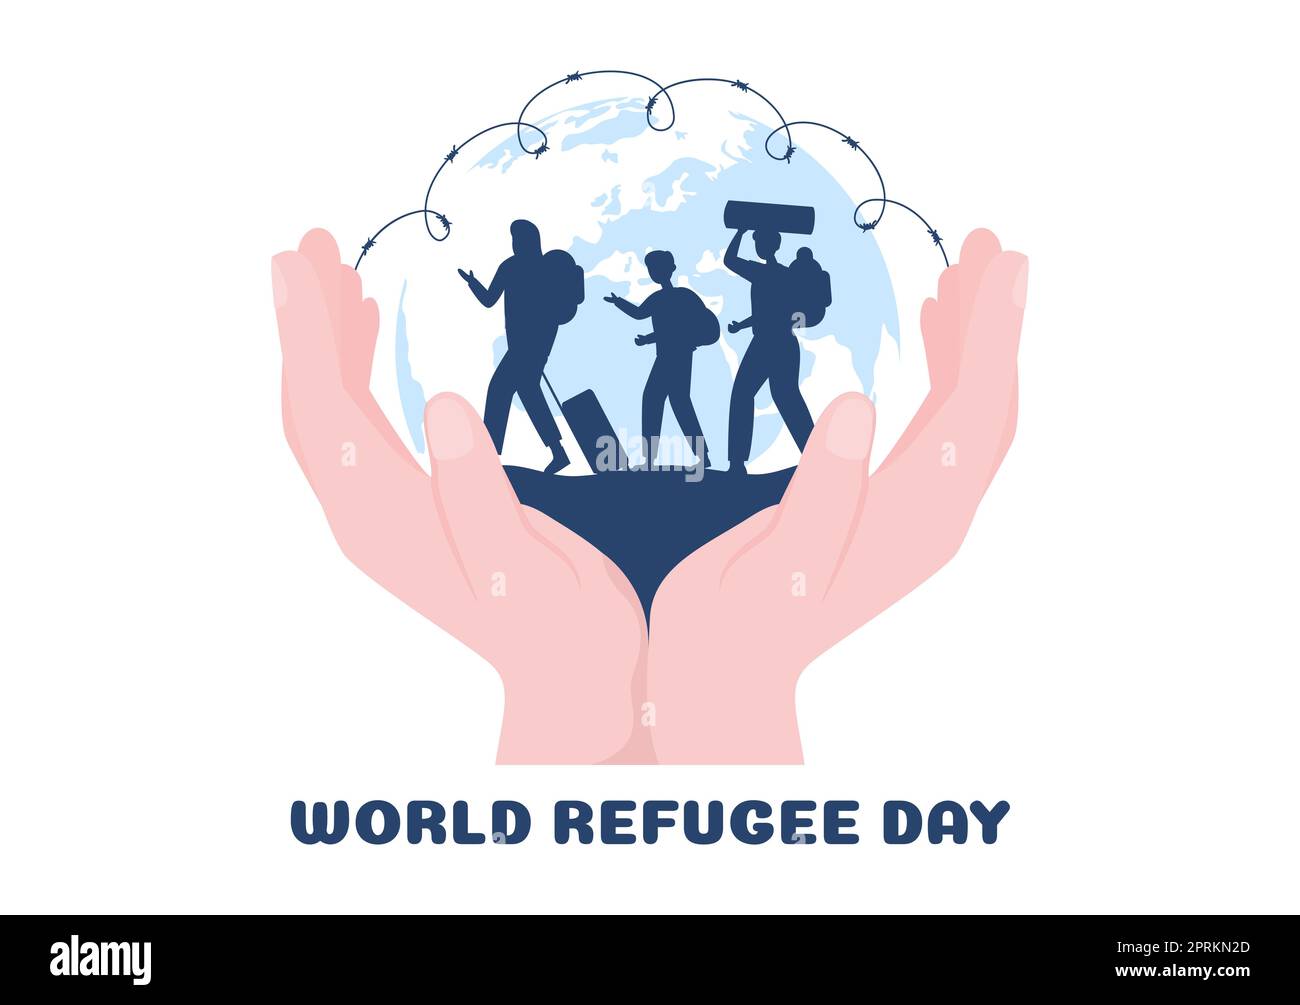 World Refugee Day Template Hand Drawn Cartoon Flat Illustration with Hands, Family and Climb Barbed Wire Fence to Immigrate to Save Place Stock Photo